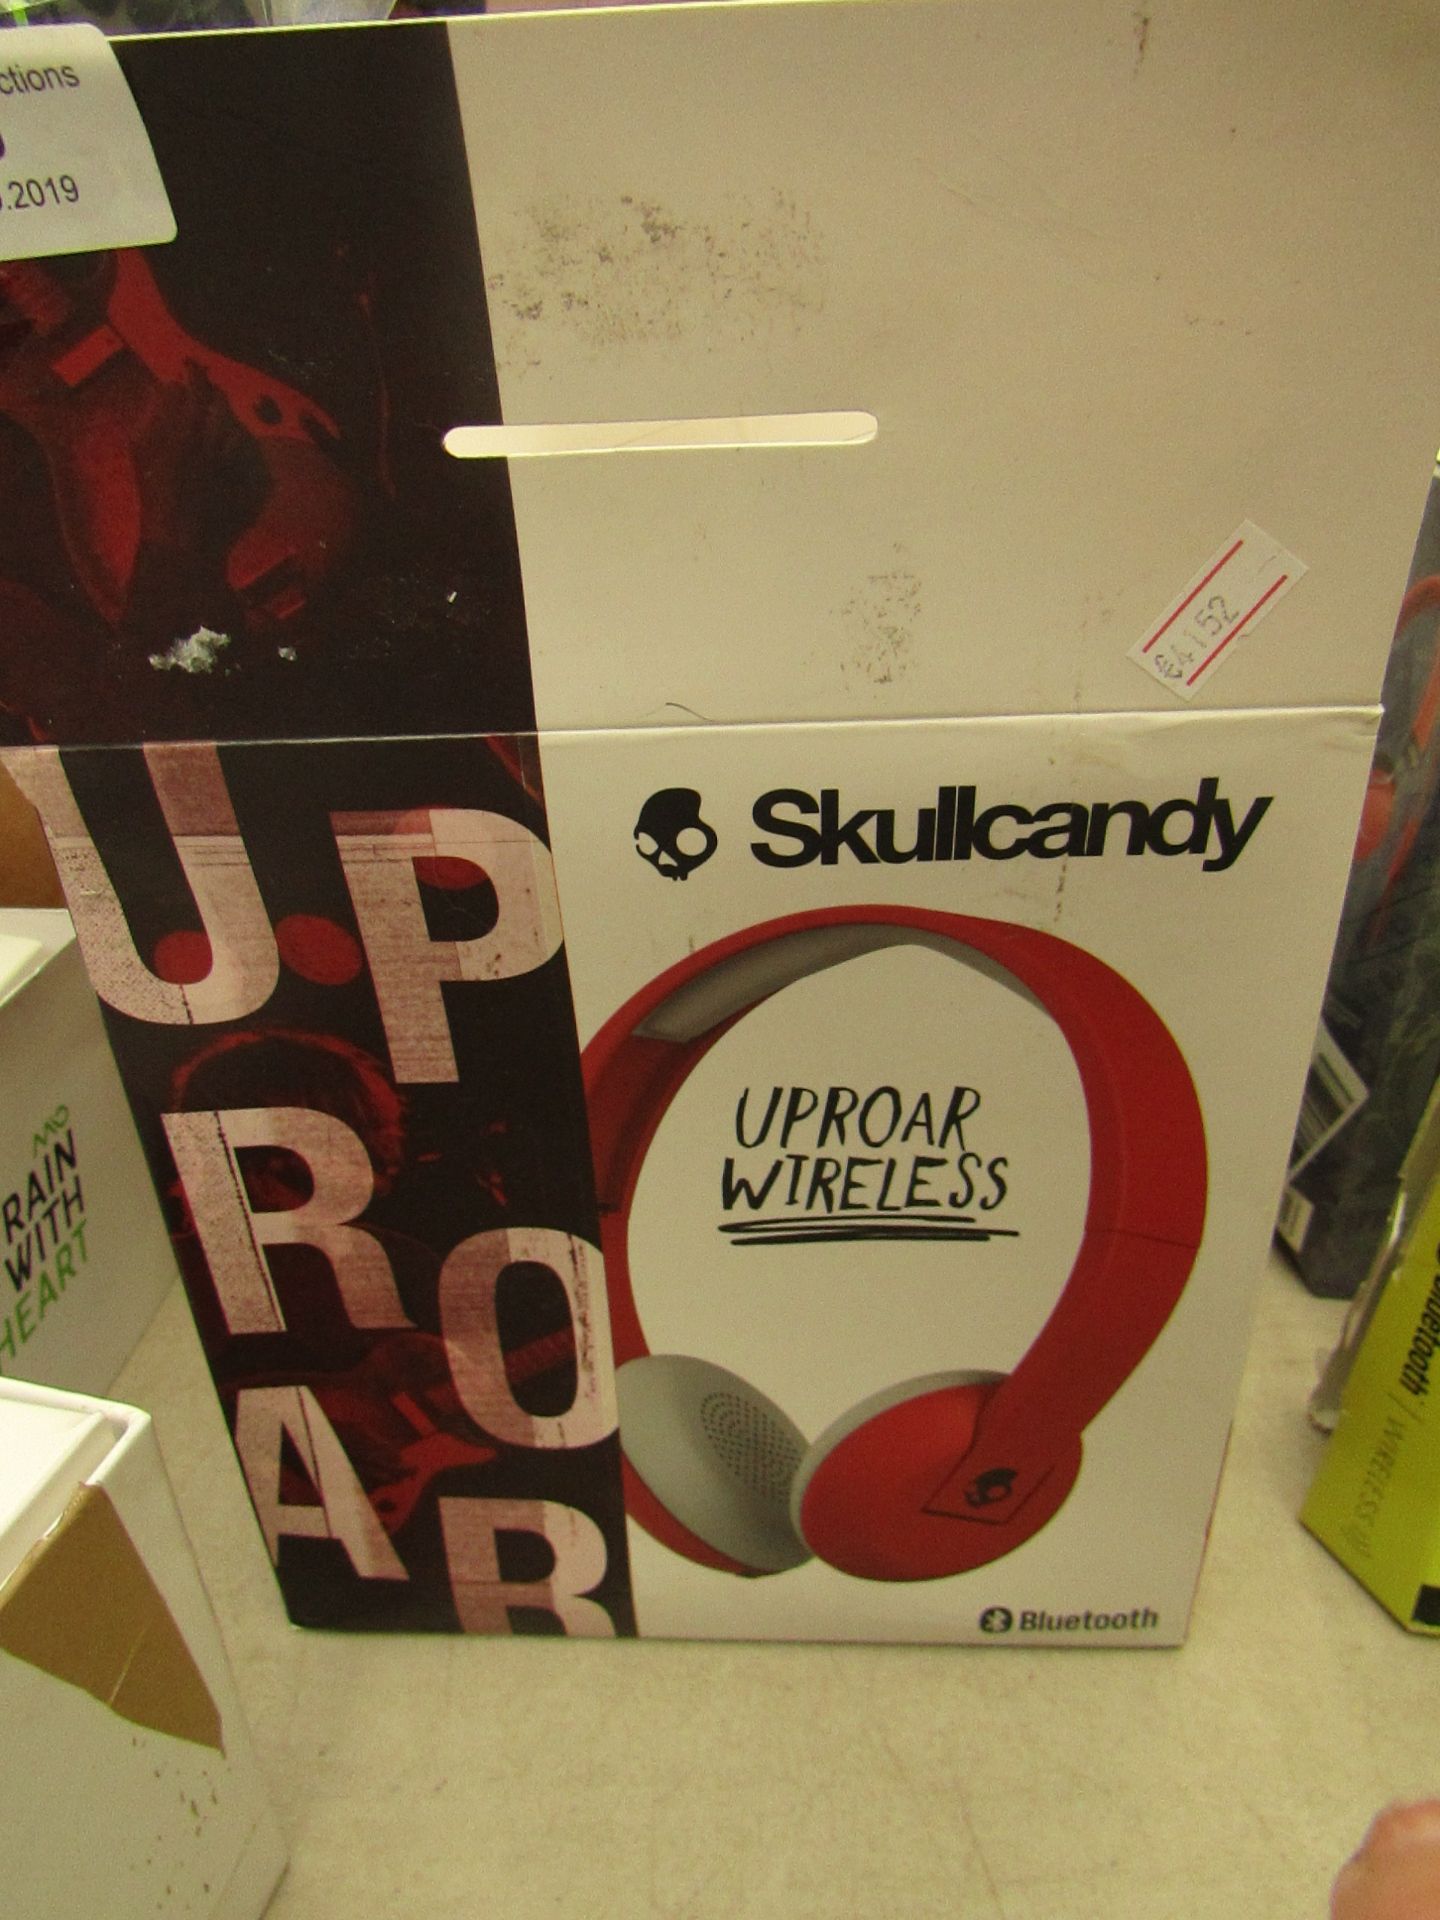 Skull candy Uproar Wireless Bluetooth Headphones, Unchecked and boxed